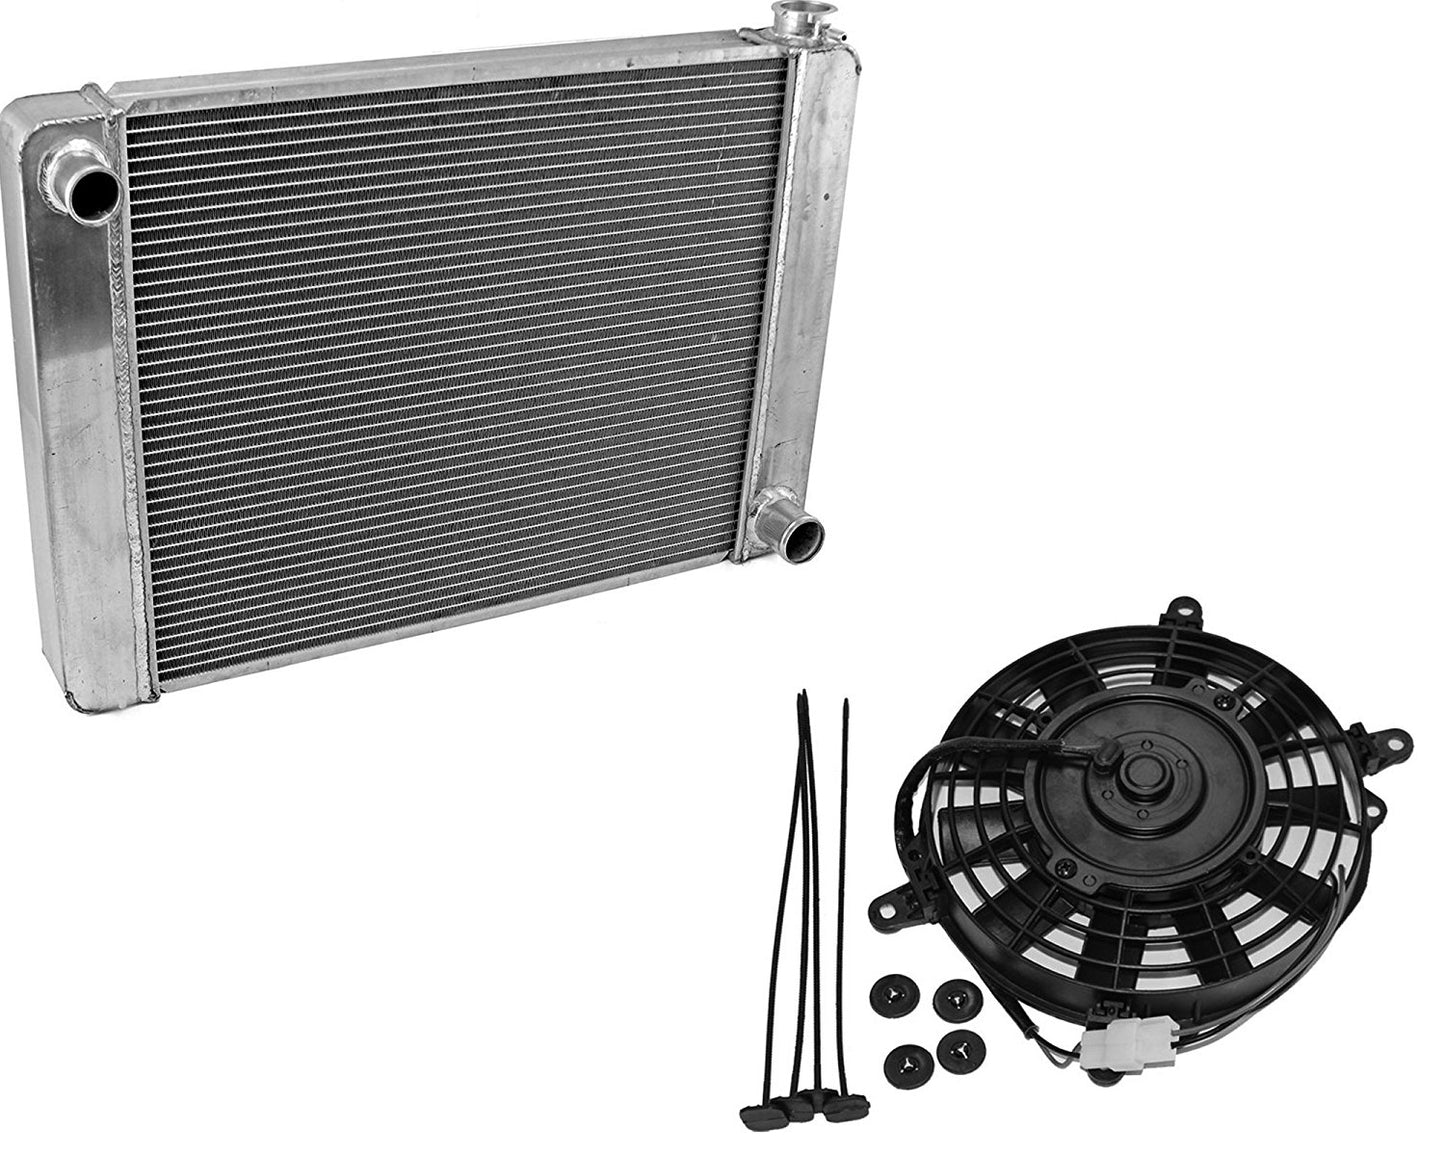 Fabricated Aluminum Radiator 31" x 19" x3" Overall For SBC BBC Chevy GM & 8" Heavy Duty Radator Cooling Fan 12v